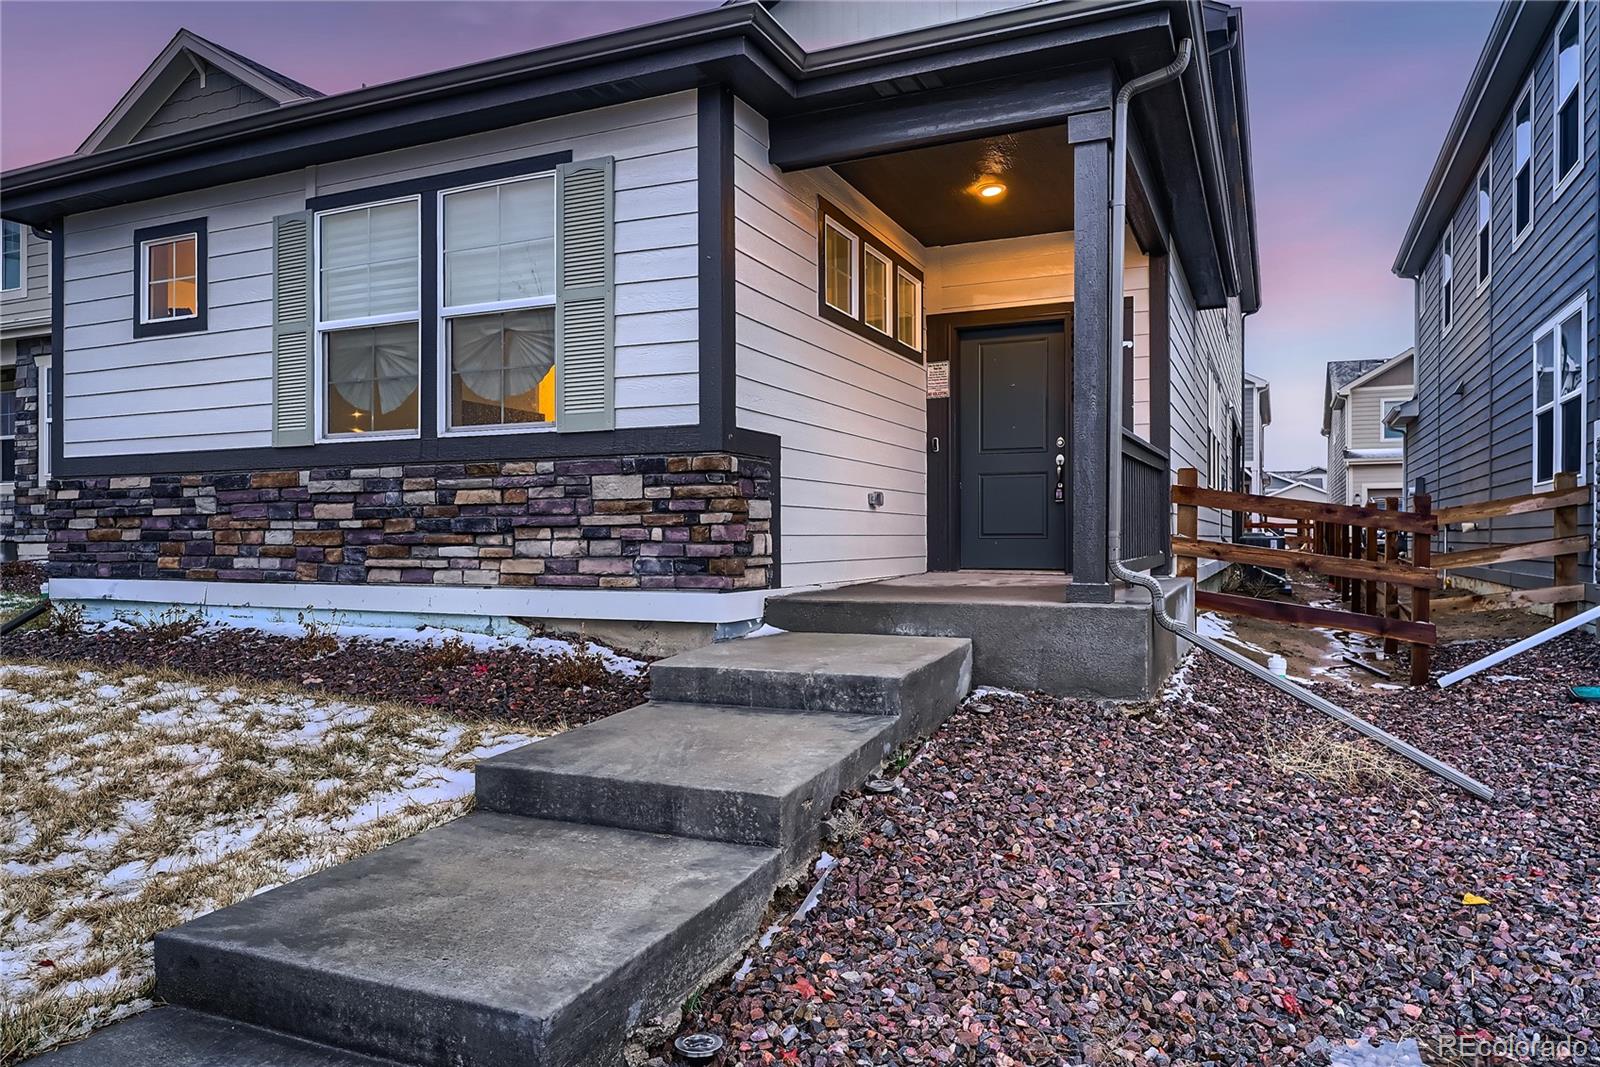 Report Image for 28438 E 8th Place,Watkins, Colorado